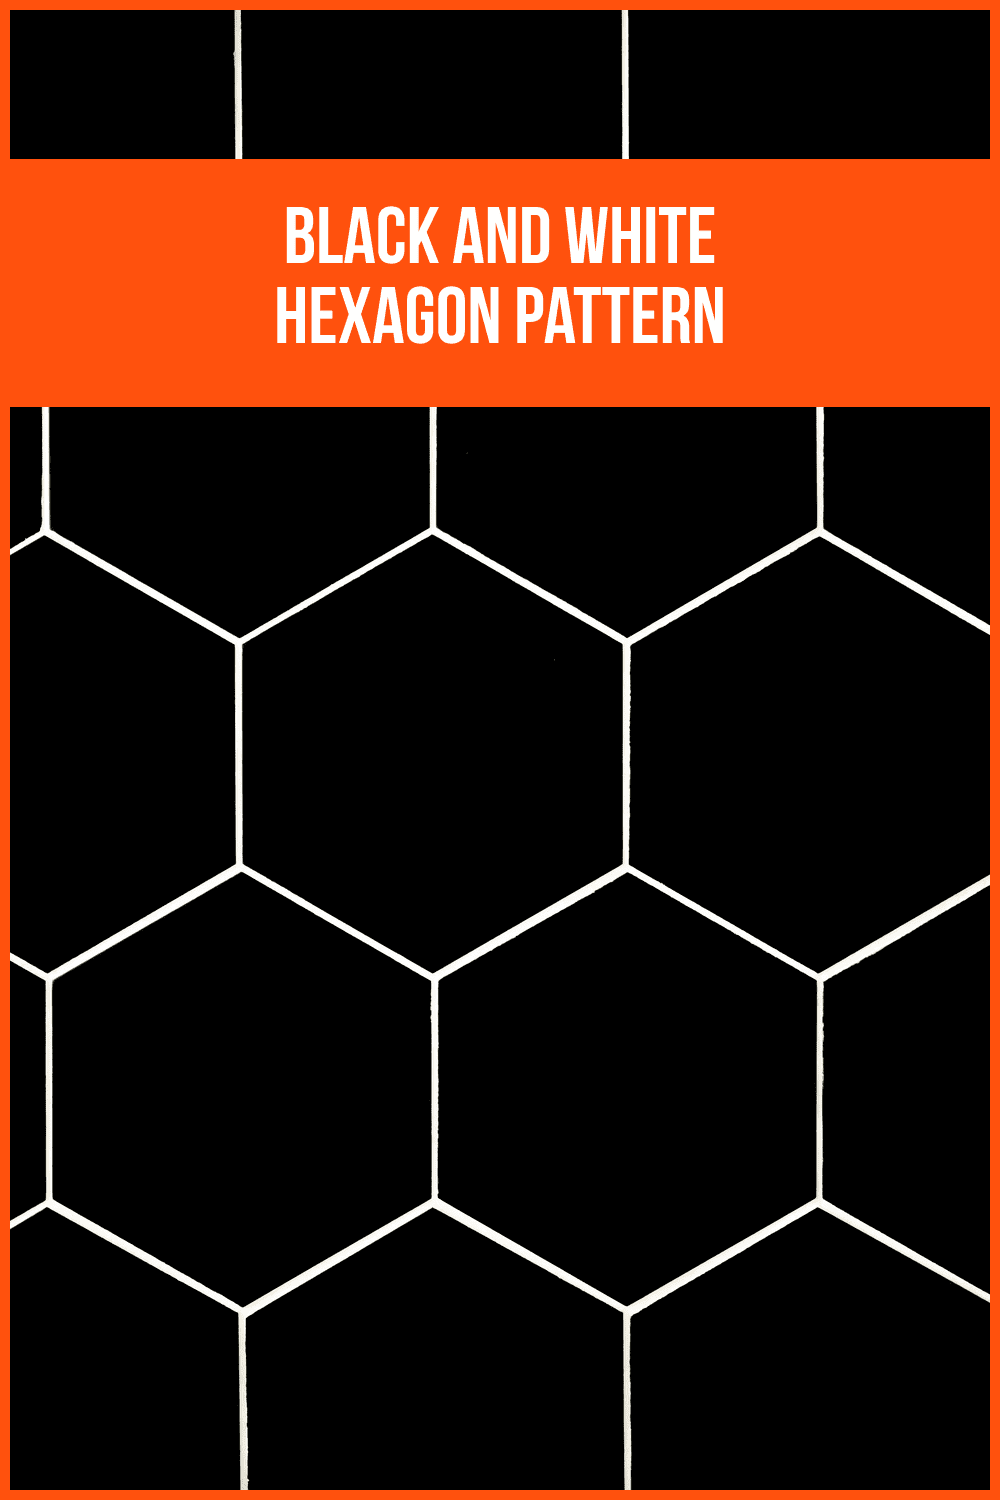 White large hexagons on a black background.